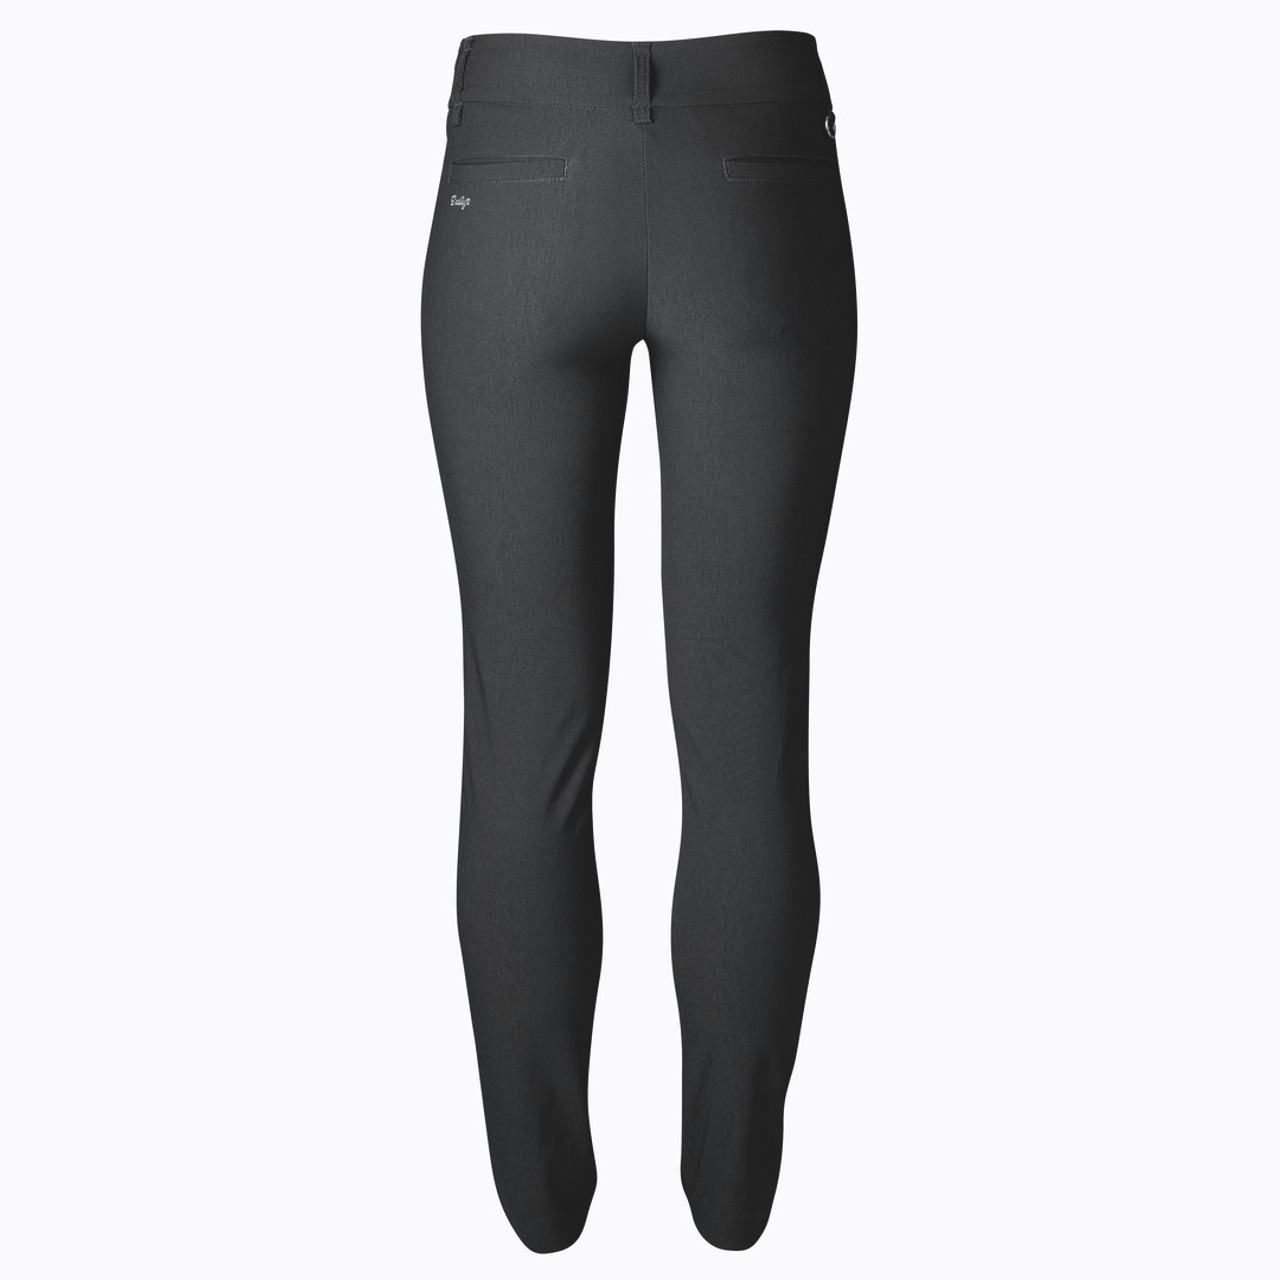  Daily Sports New Womens Magic Pants 2 Black 001/271 : Clothing,  Shoes & Jewelry